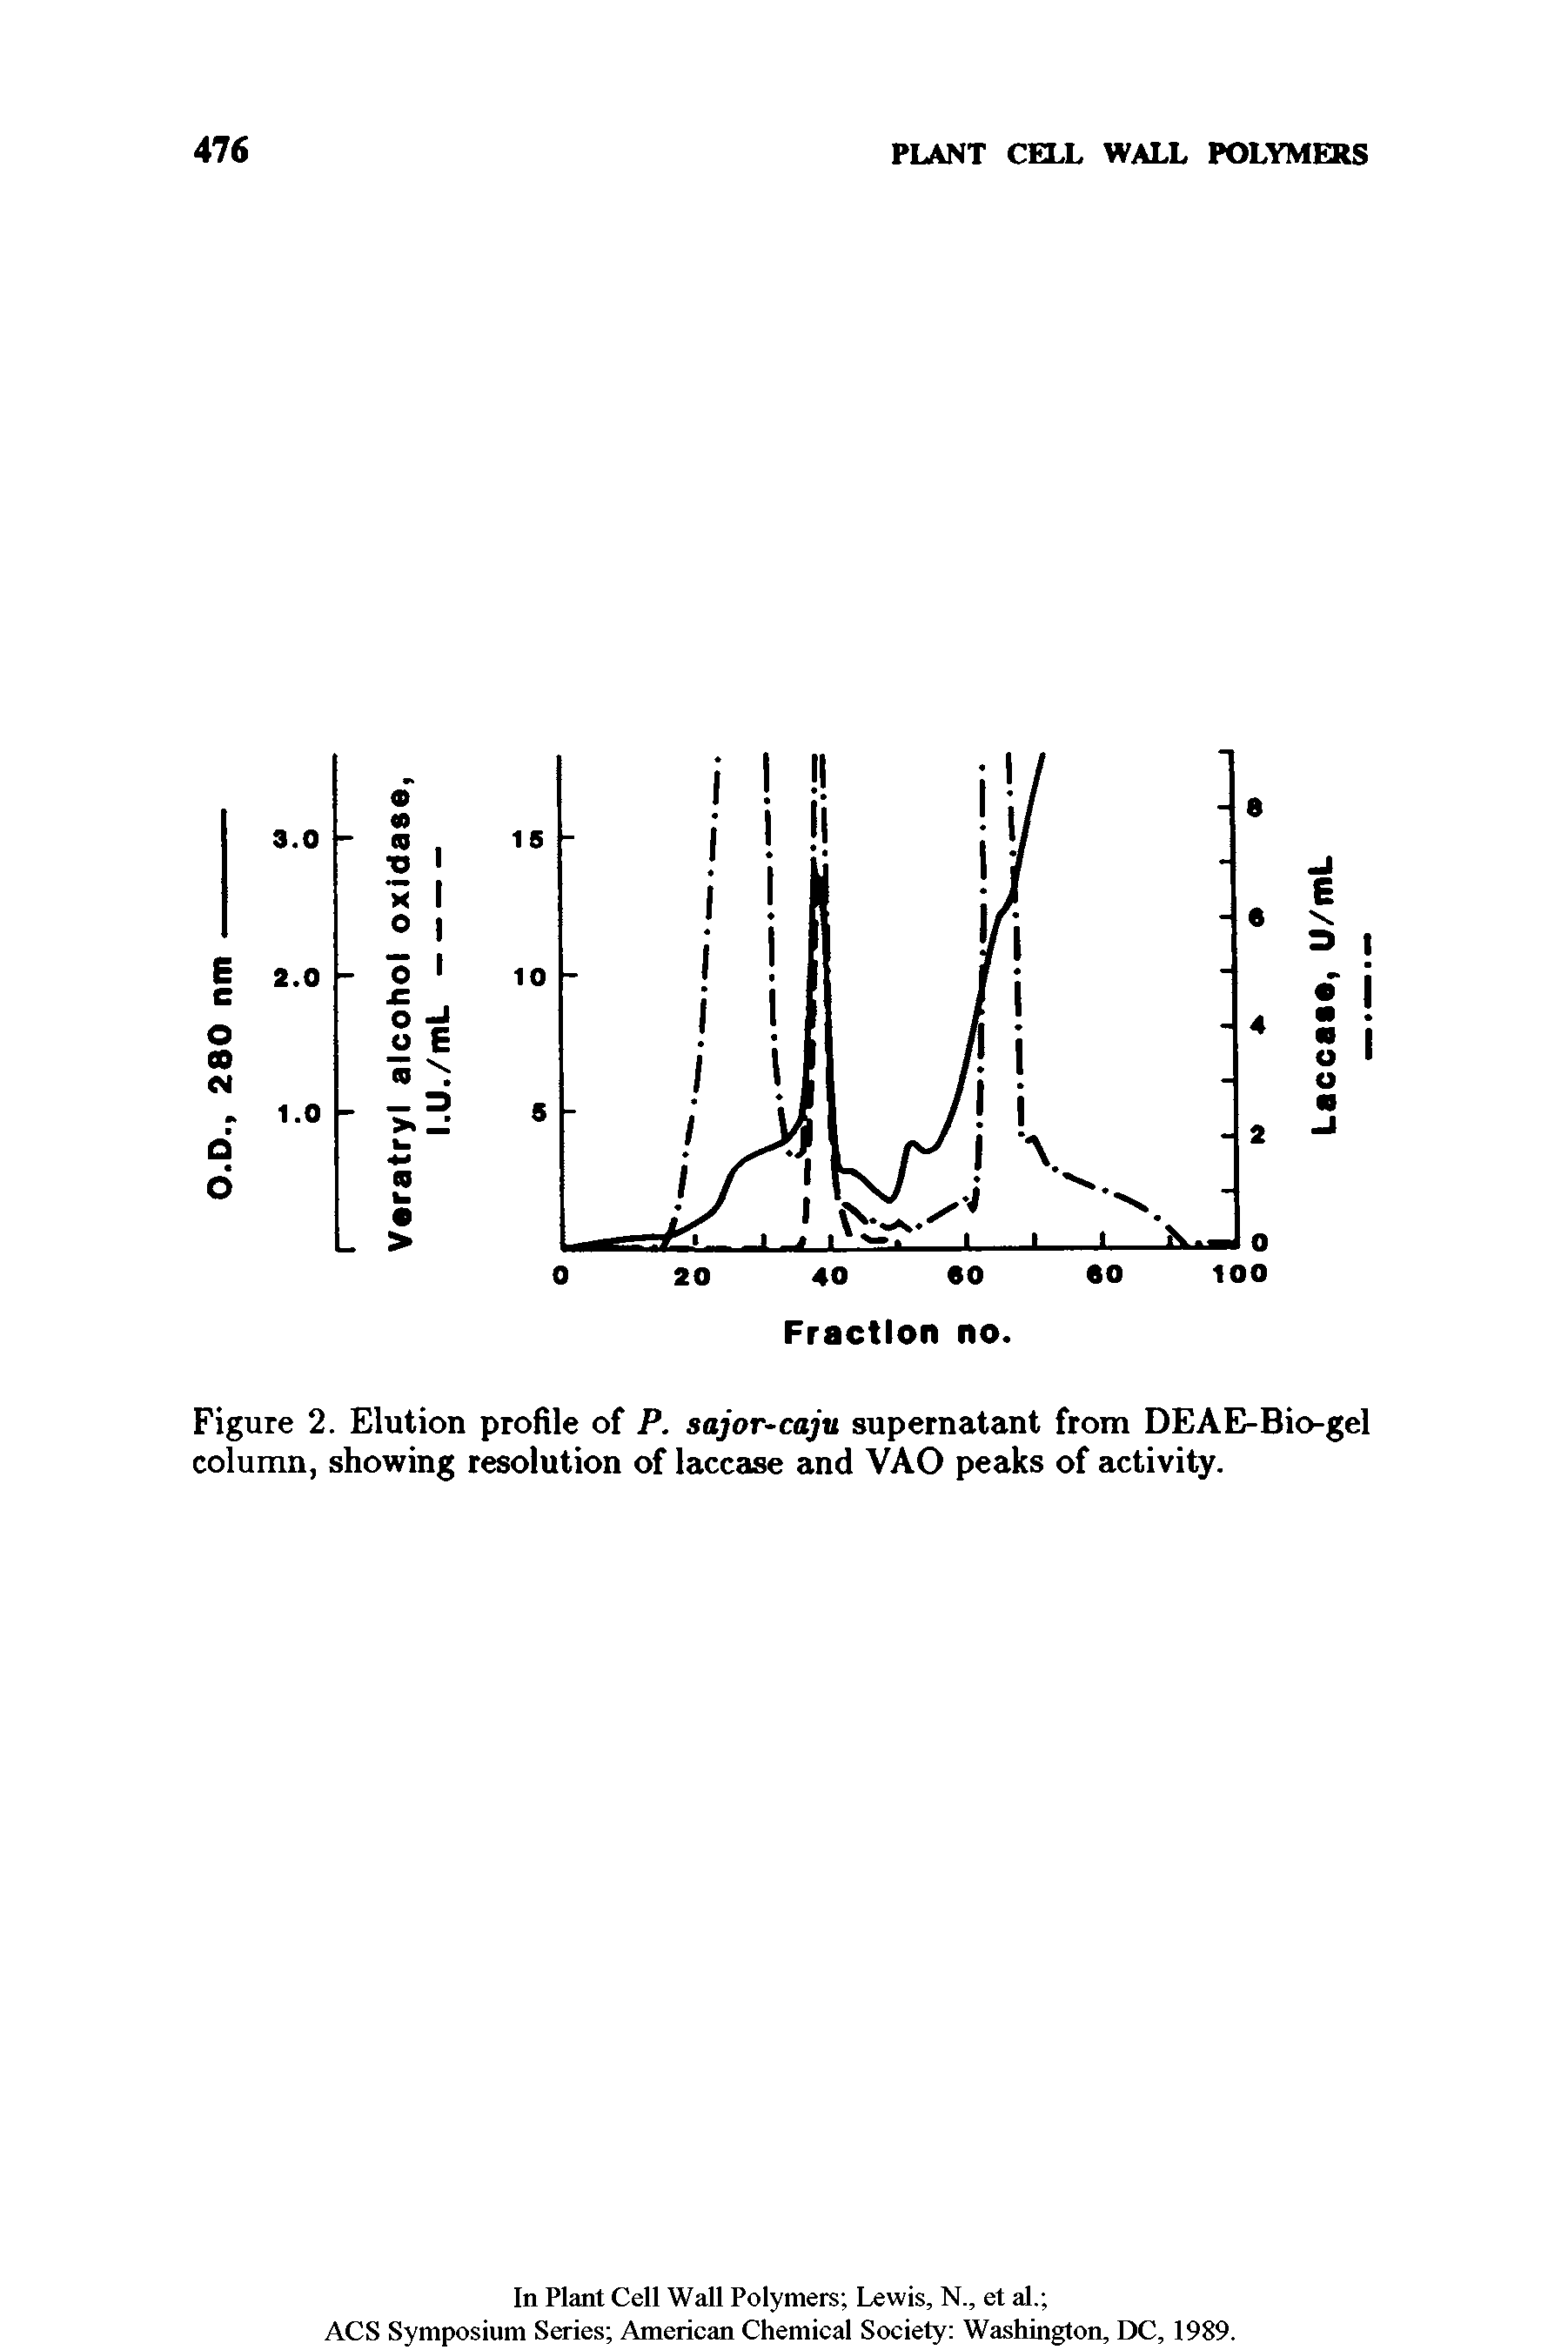 Figure 2. Elution profile of P. sajor-caju supernatant from DEAE-Bio-gel column, showing resolution of laccase and VAO peaks of activity.